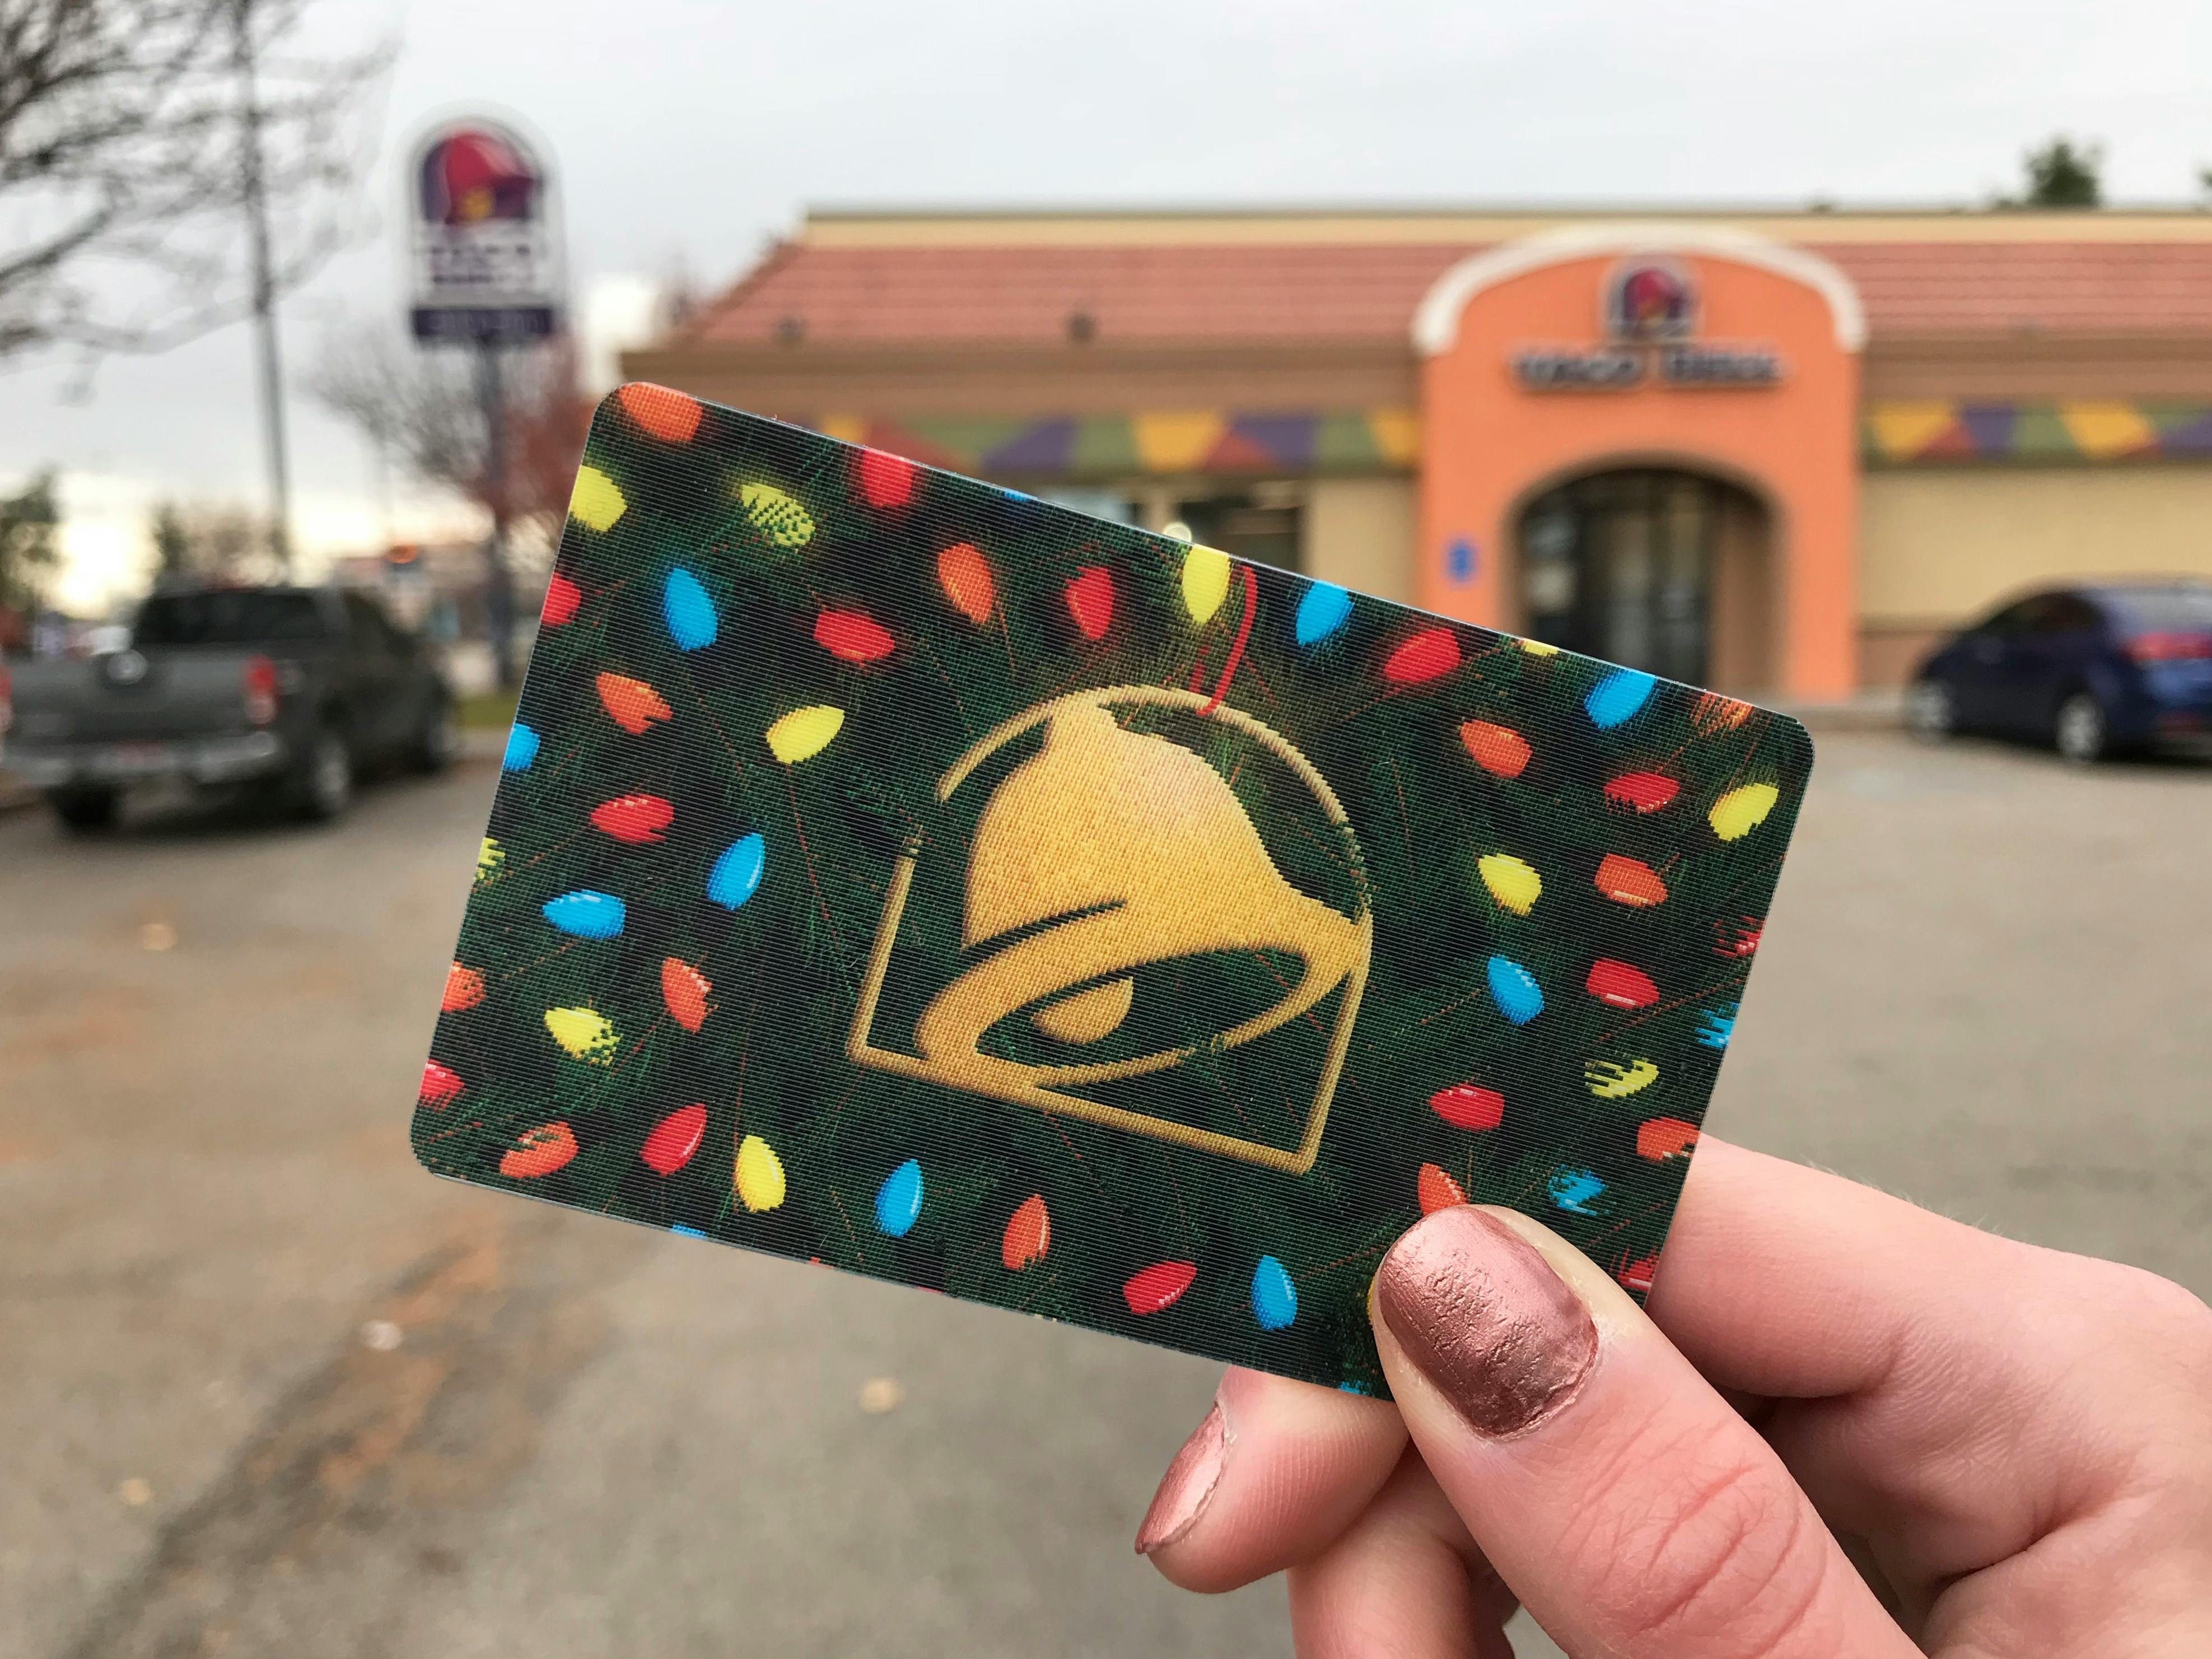 A Taco Bell gift card being held up in front of a Taco Bell restaurant.